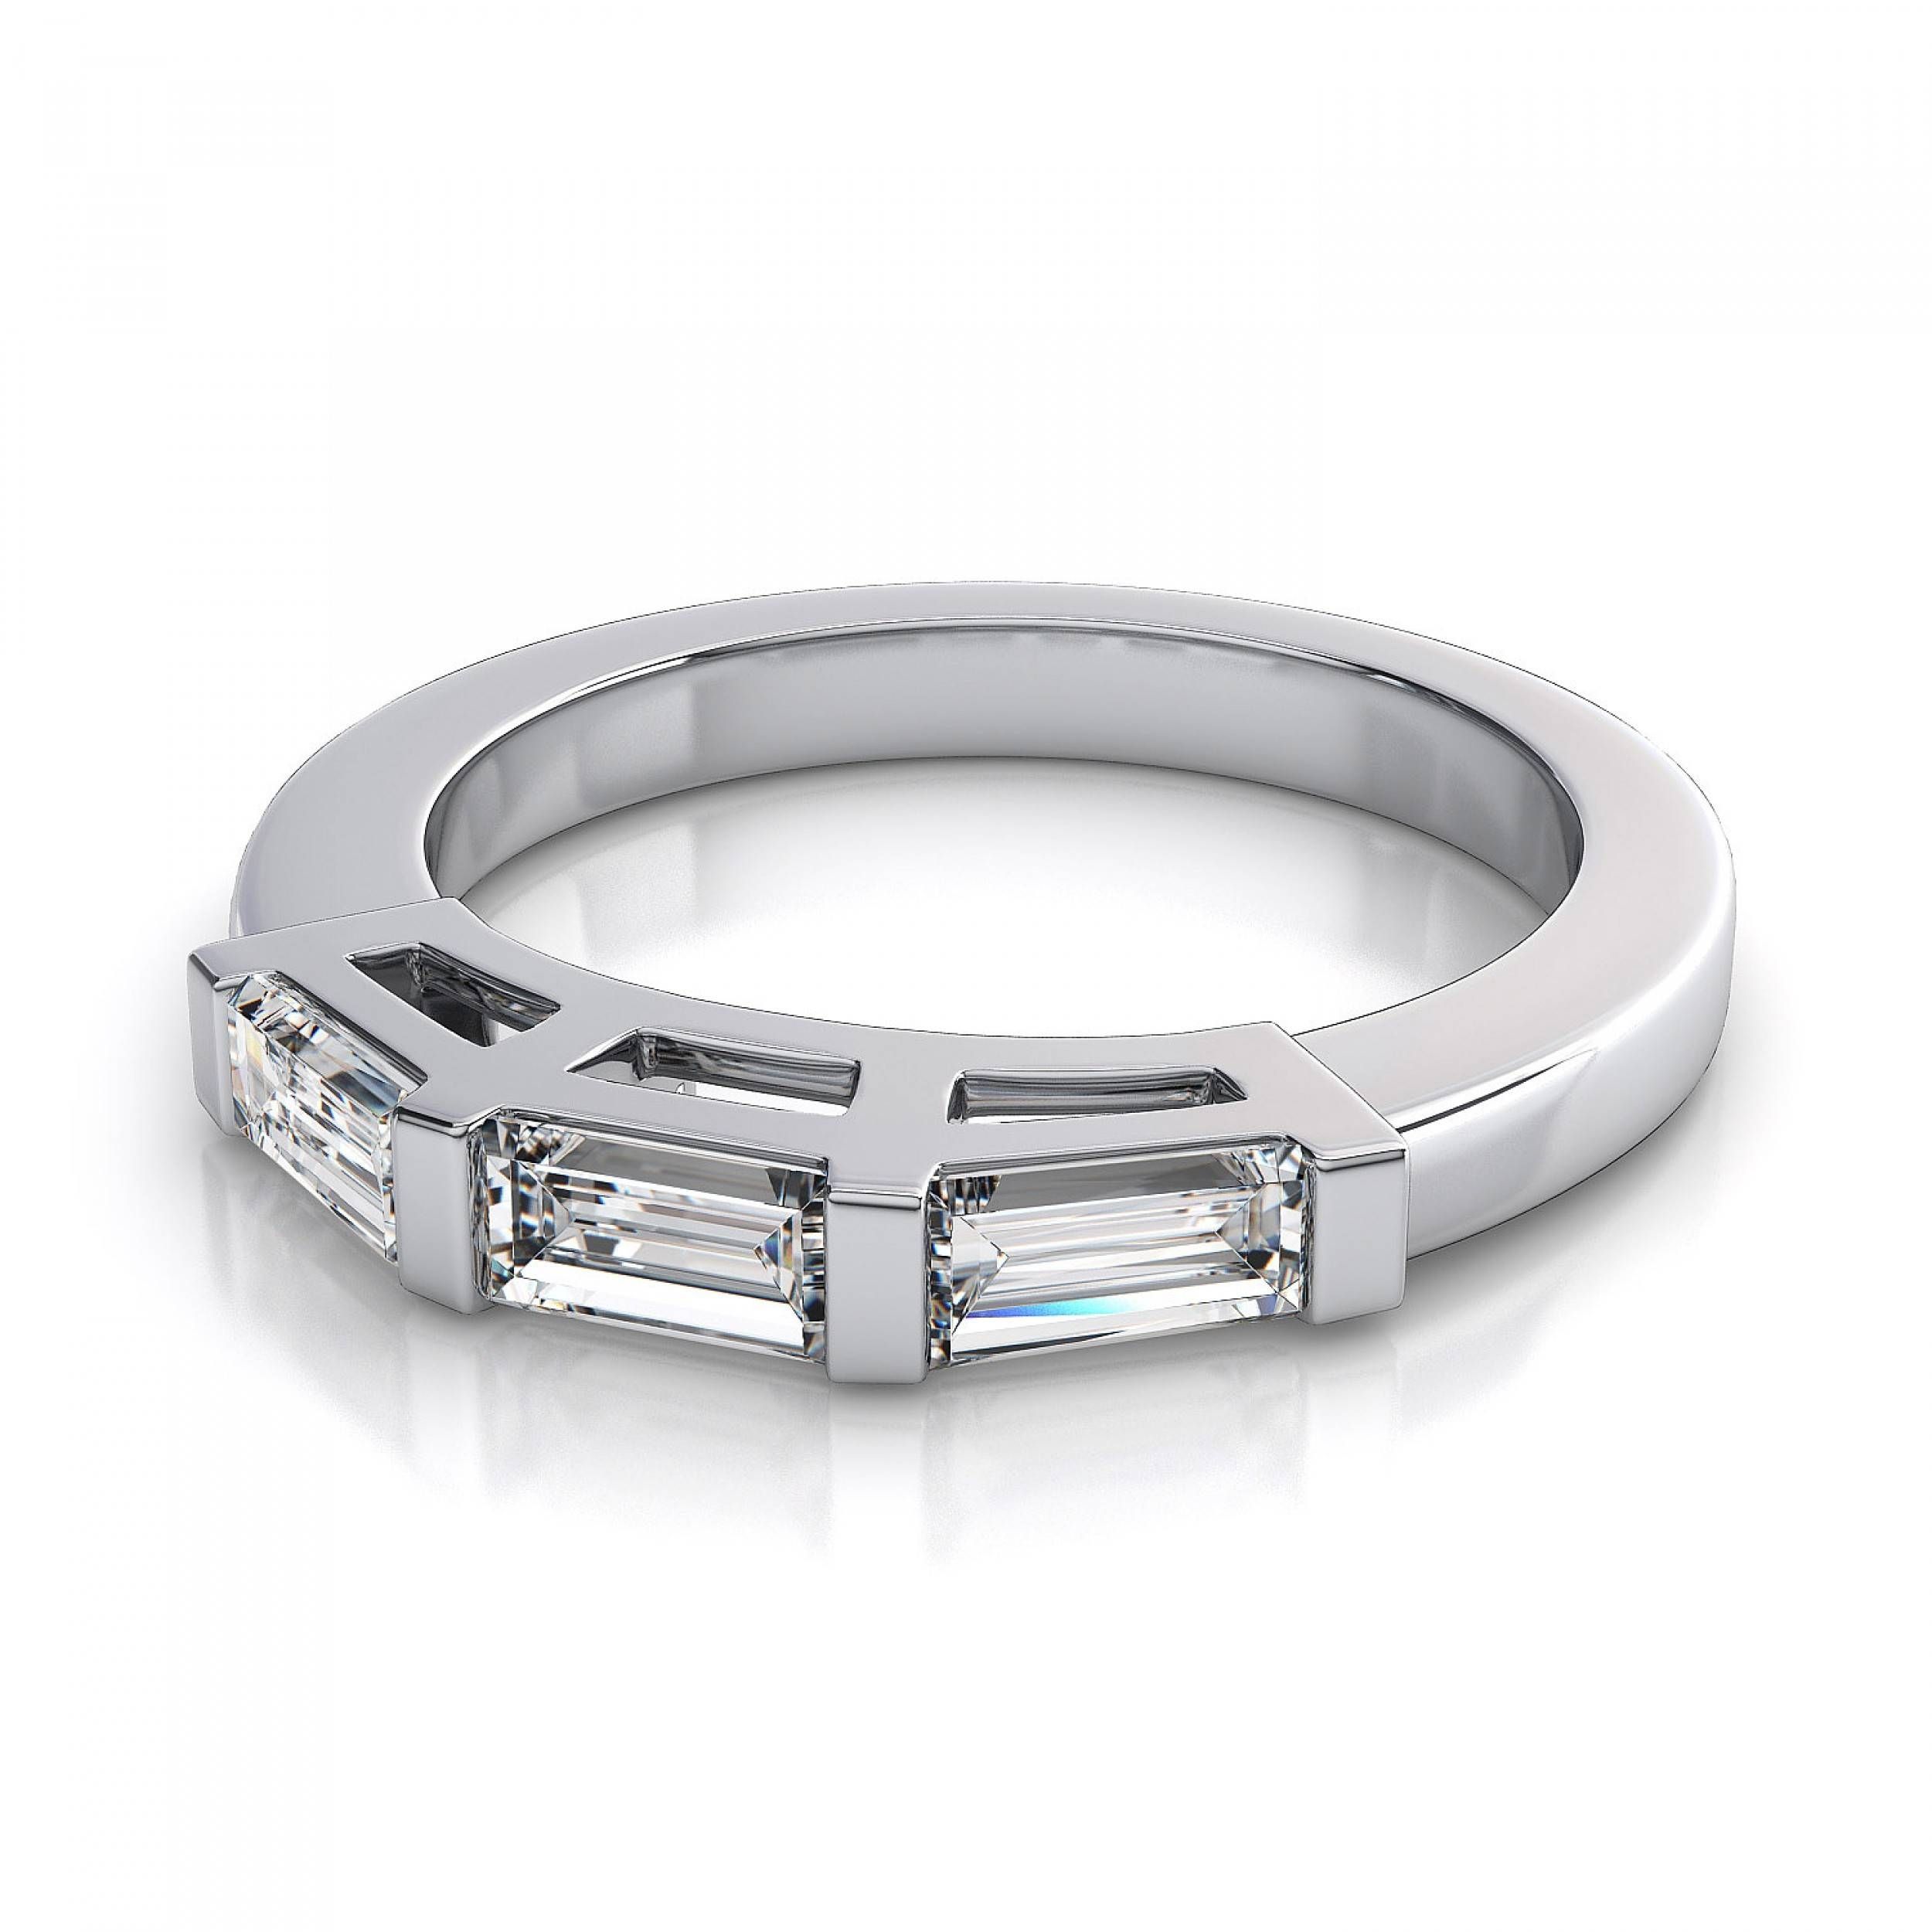 Baguette Round Diamond Wedding Band Tags : Baguette Wedding Ring With Most Recent Mens Baguette Diamond Wedding Bands (View 7 of 15)